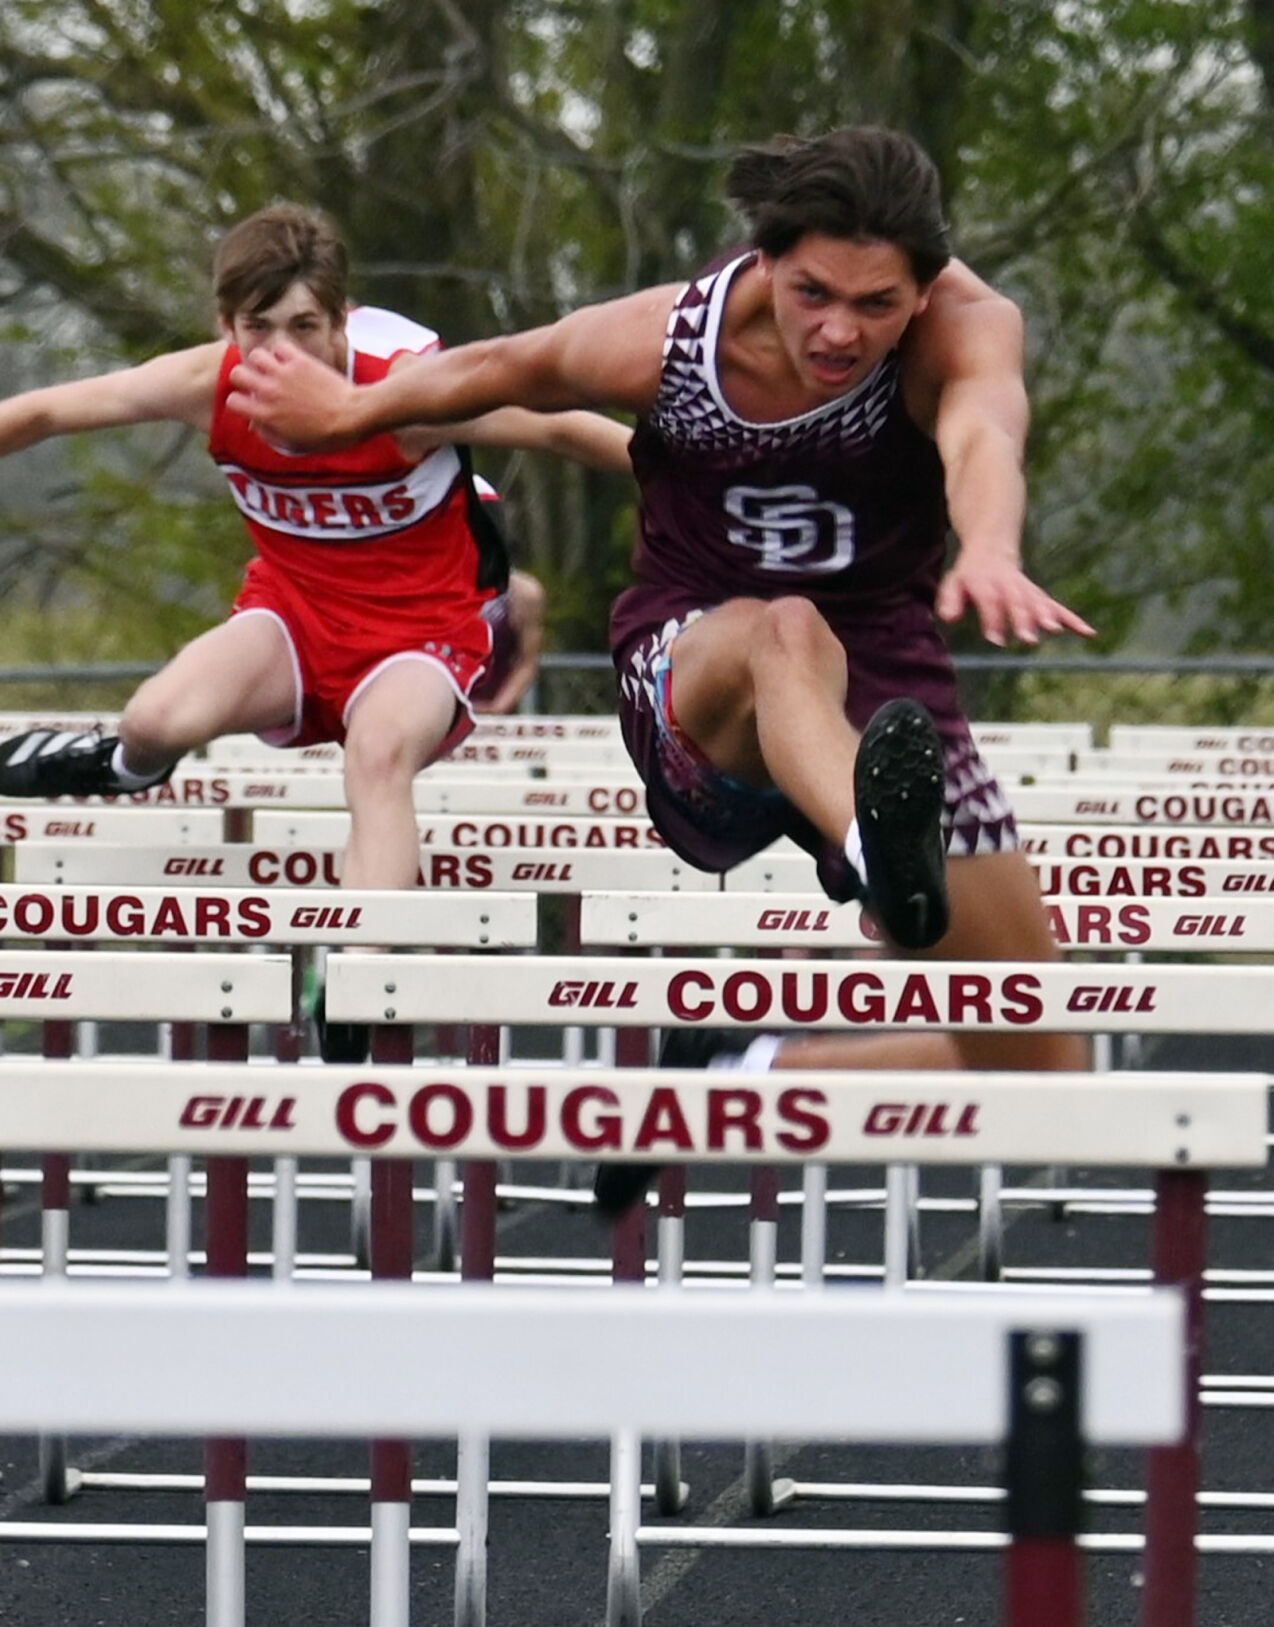 South Decatur Track and Field Senior Night Celebrates Athletes’ Achievements